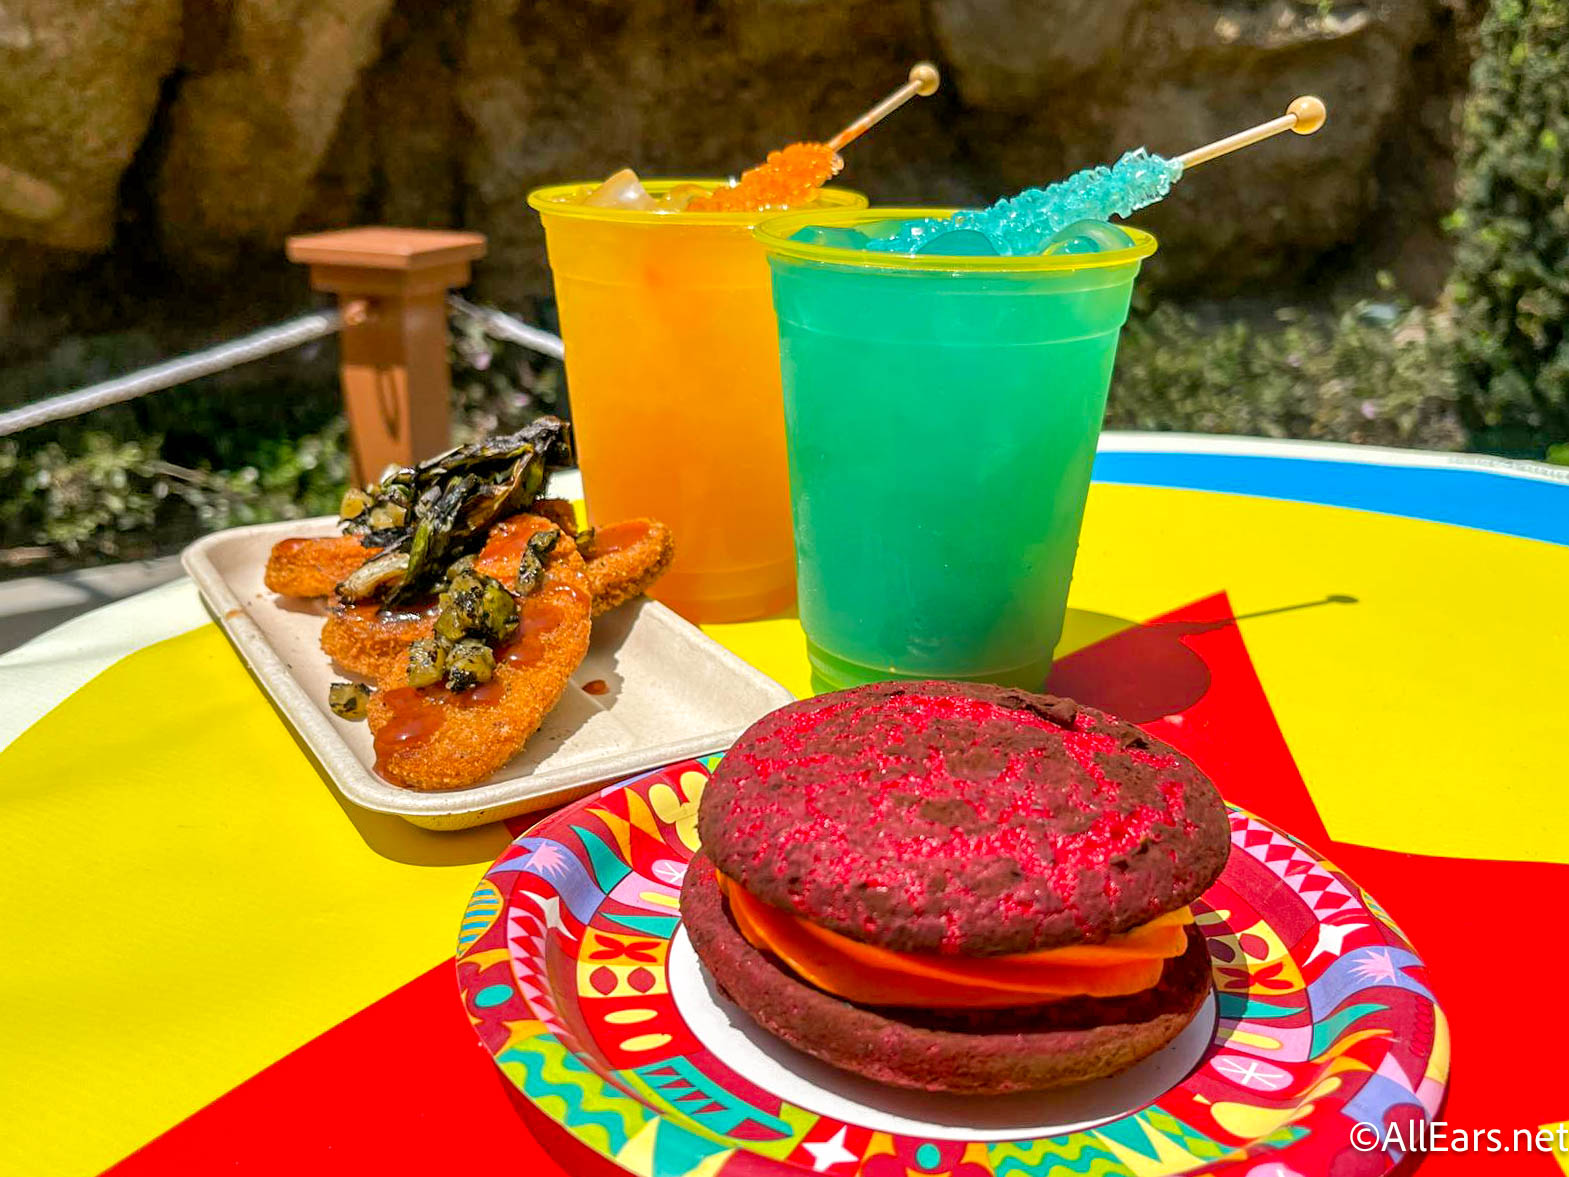 MASSIVE REVIEW: We Tried Every NEW Food Booth at Disney’s Pixar Fest!